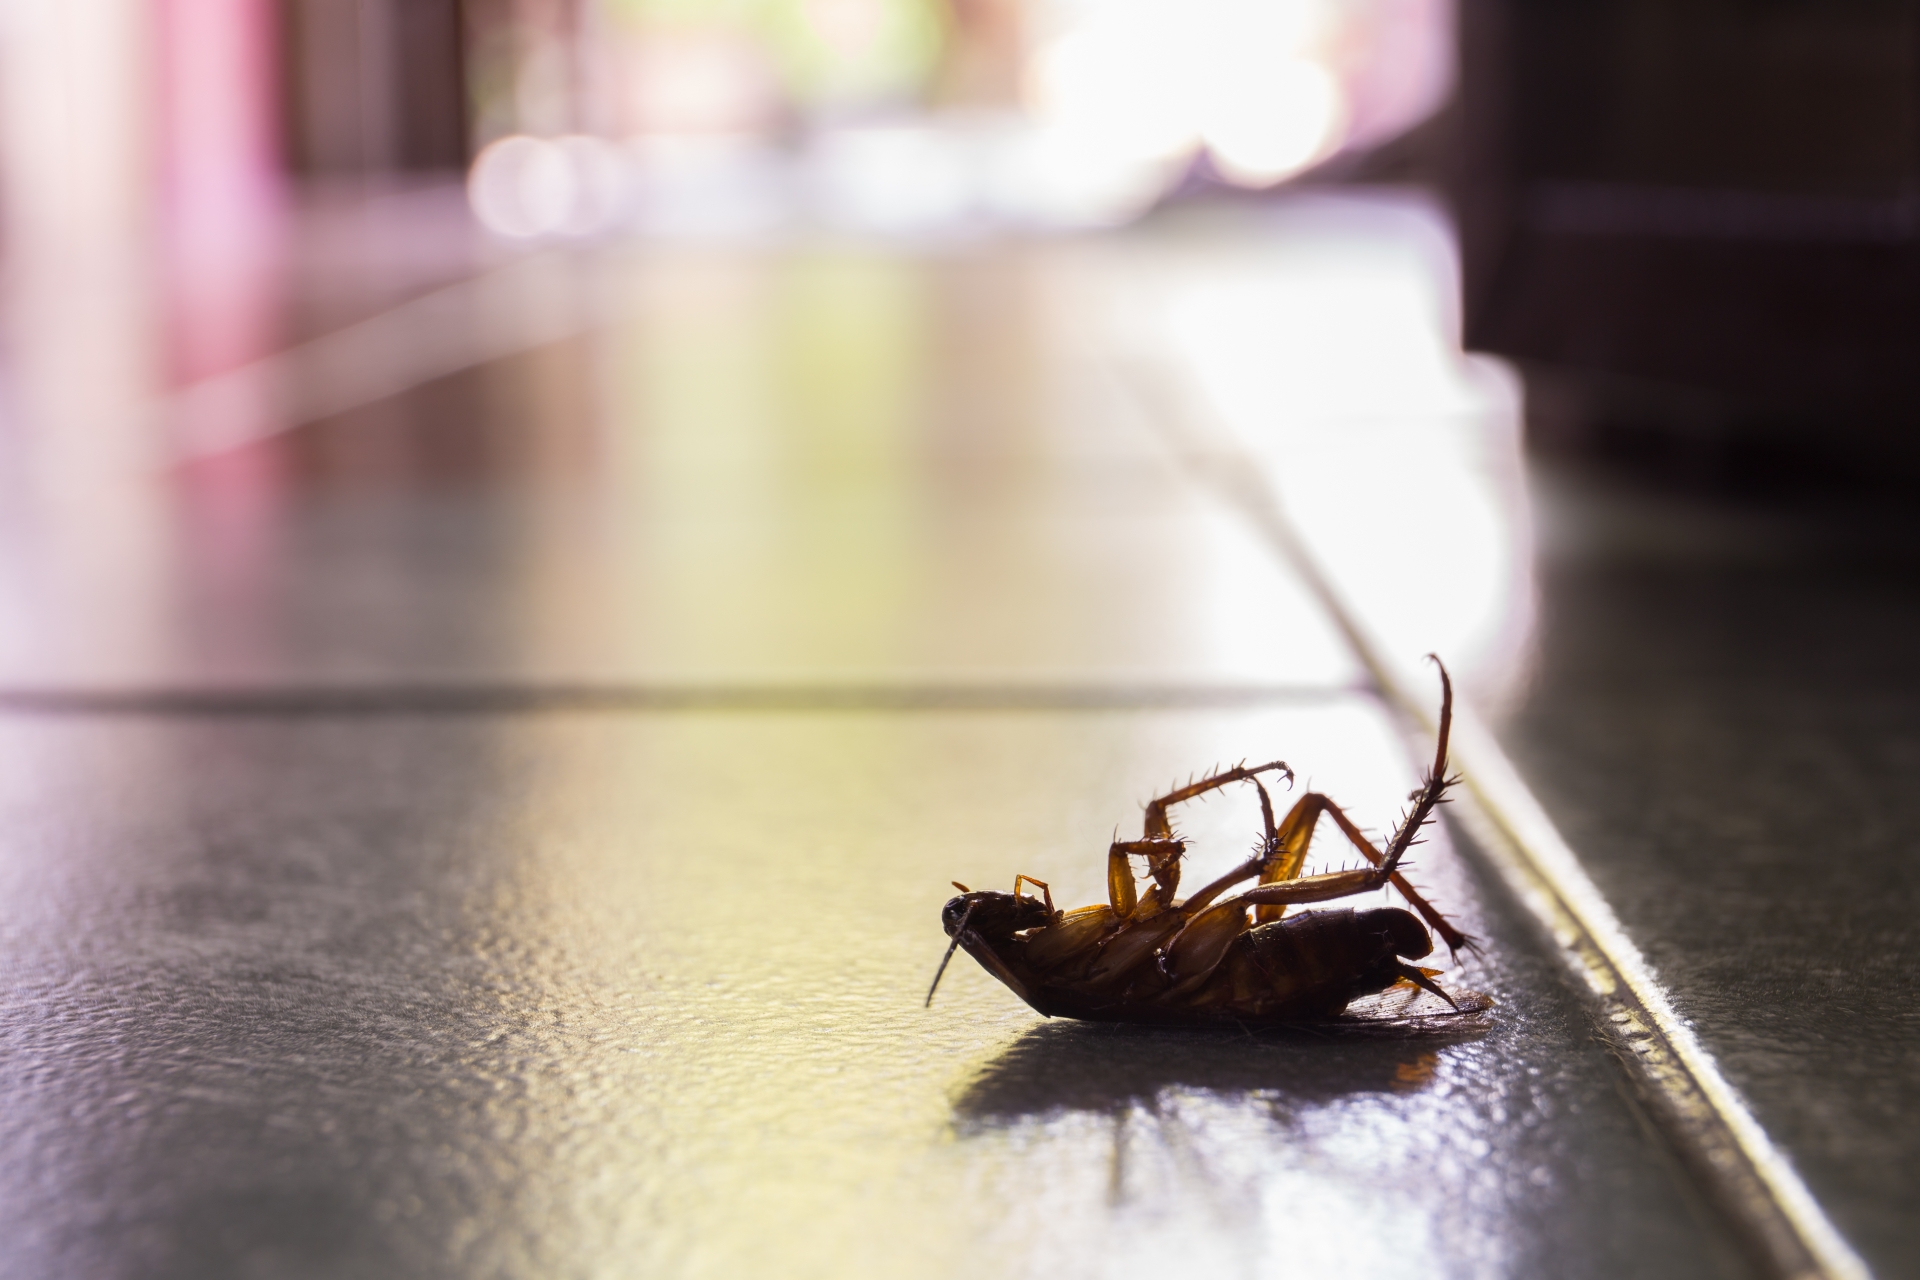 Cockroach Control, Pest Control in Kingston upon Thames, KT1. Call Now 020 8166 9746